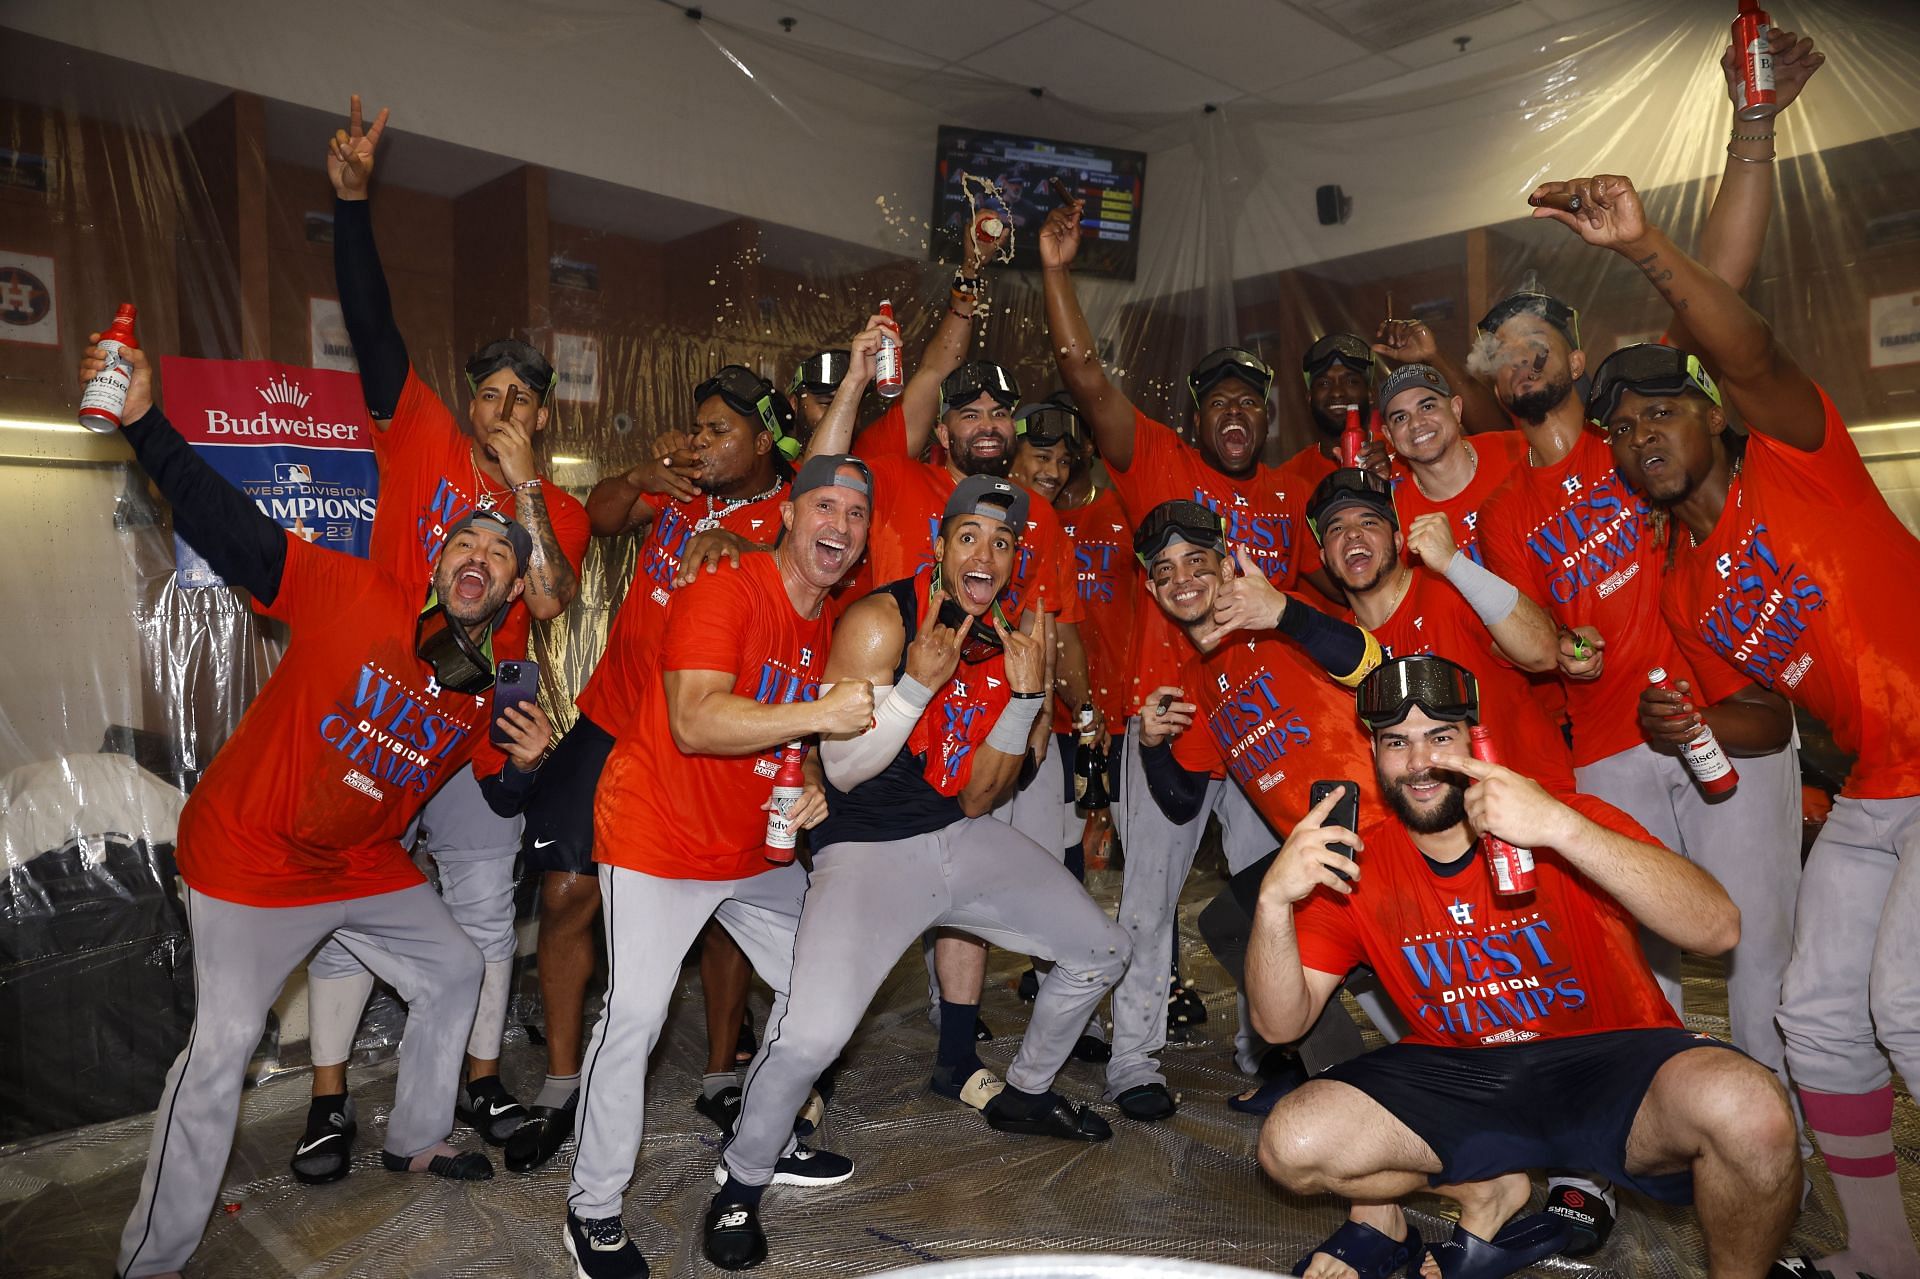 The Houston Astros clinched the AL West Division after a nail-biting end of the regular season with the Texas Rangers.